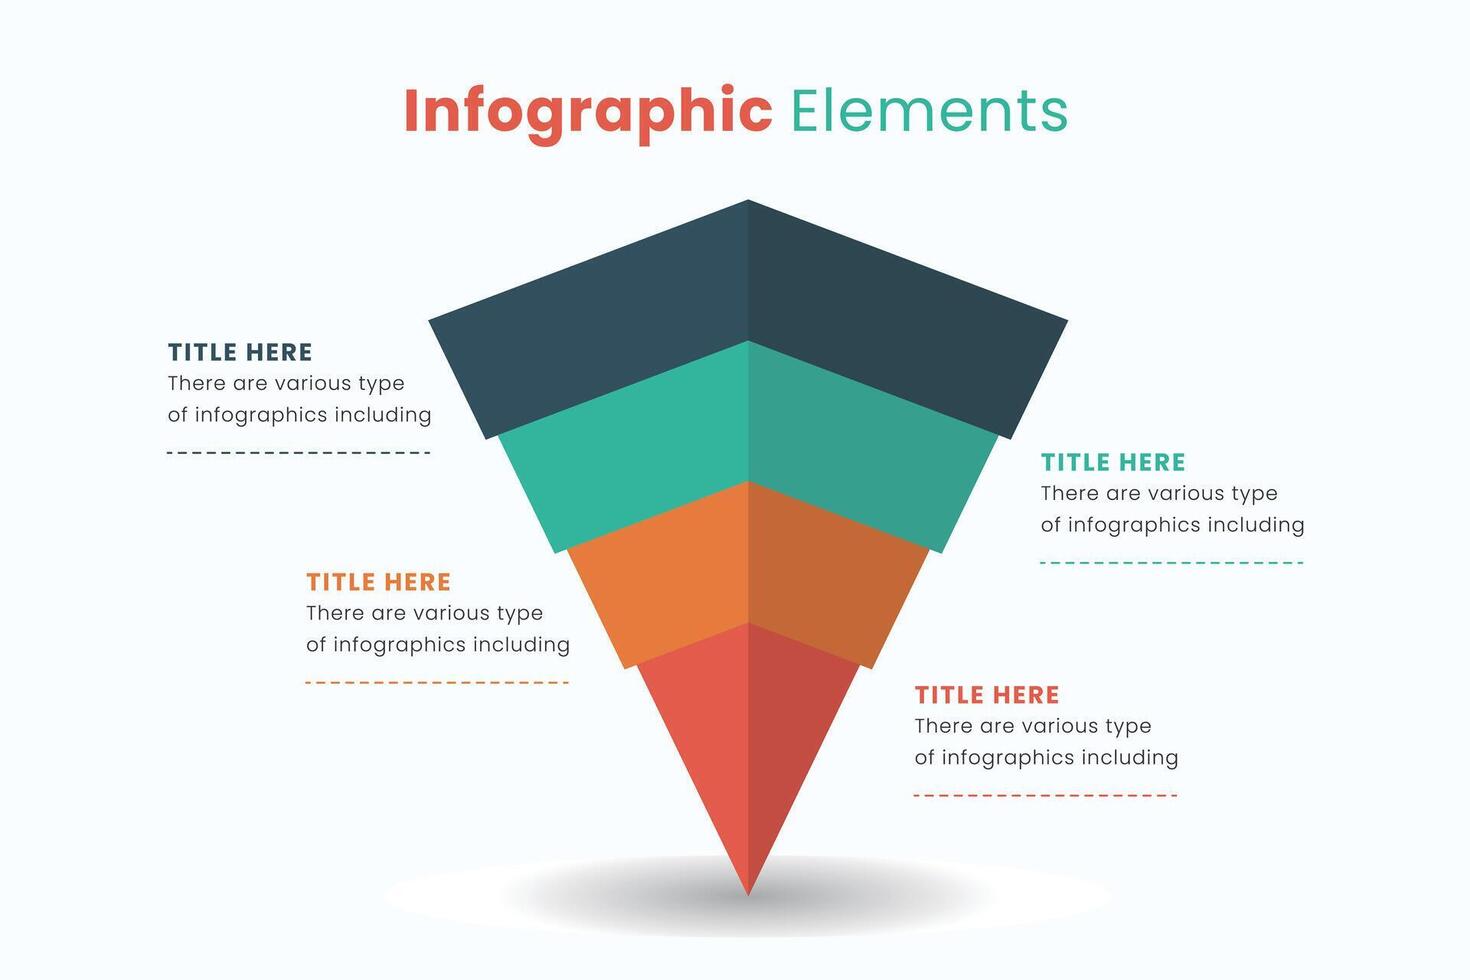 Pyramid infographic design element template, layout vector for presentation, banner, report, brochure, and flyer.